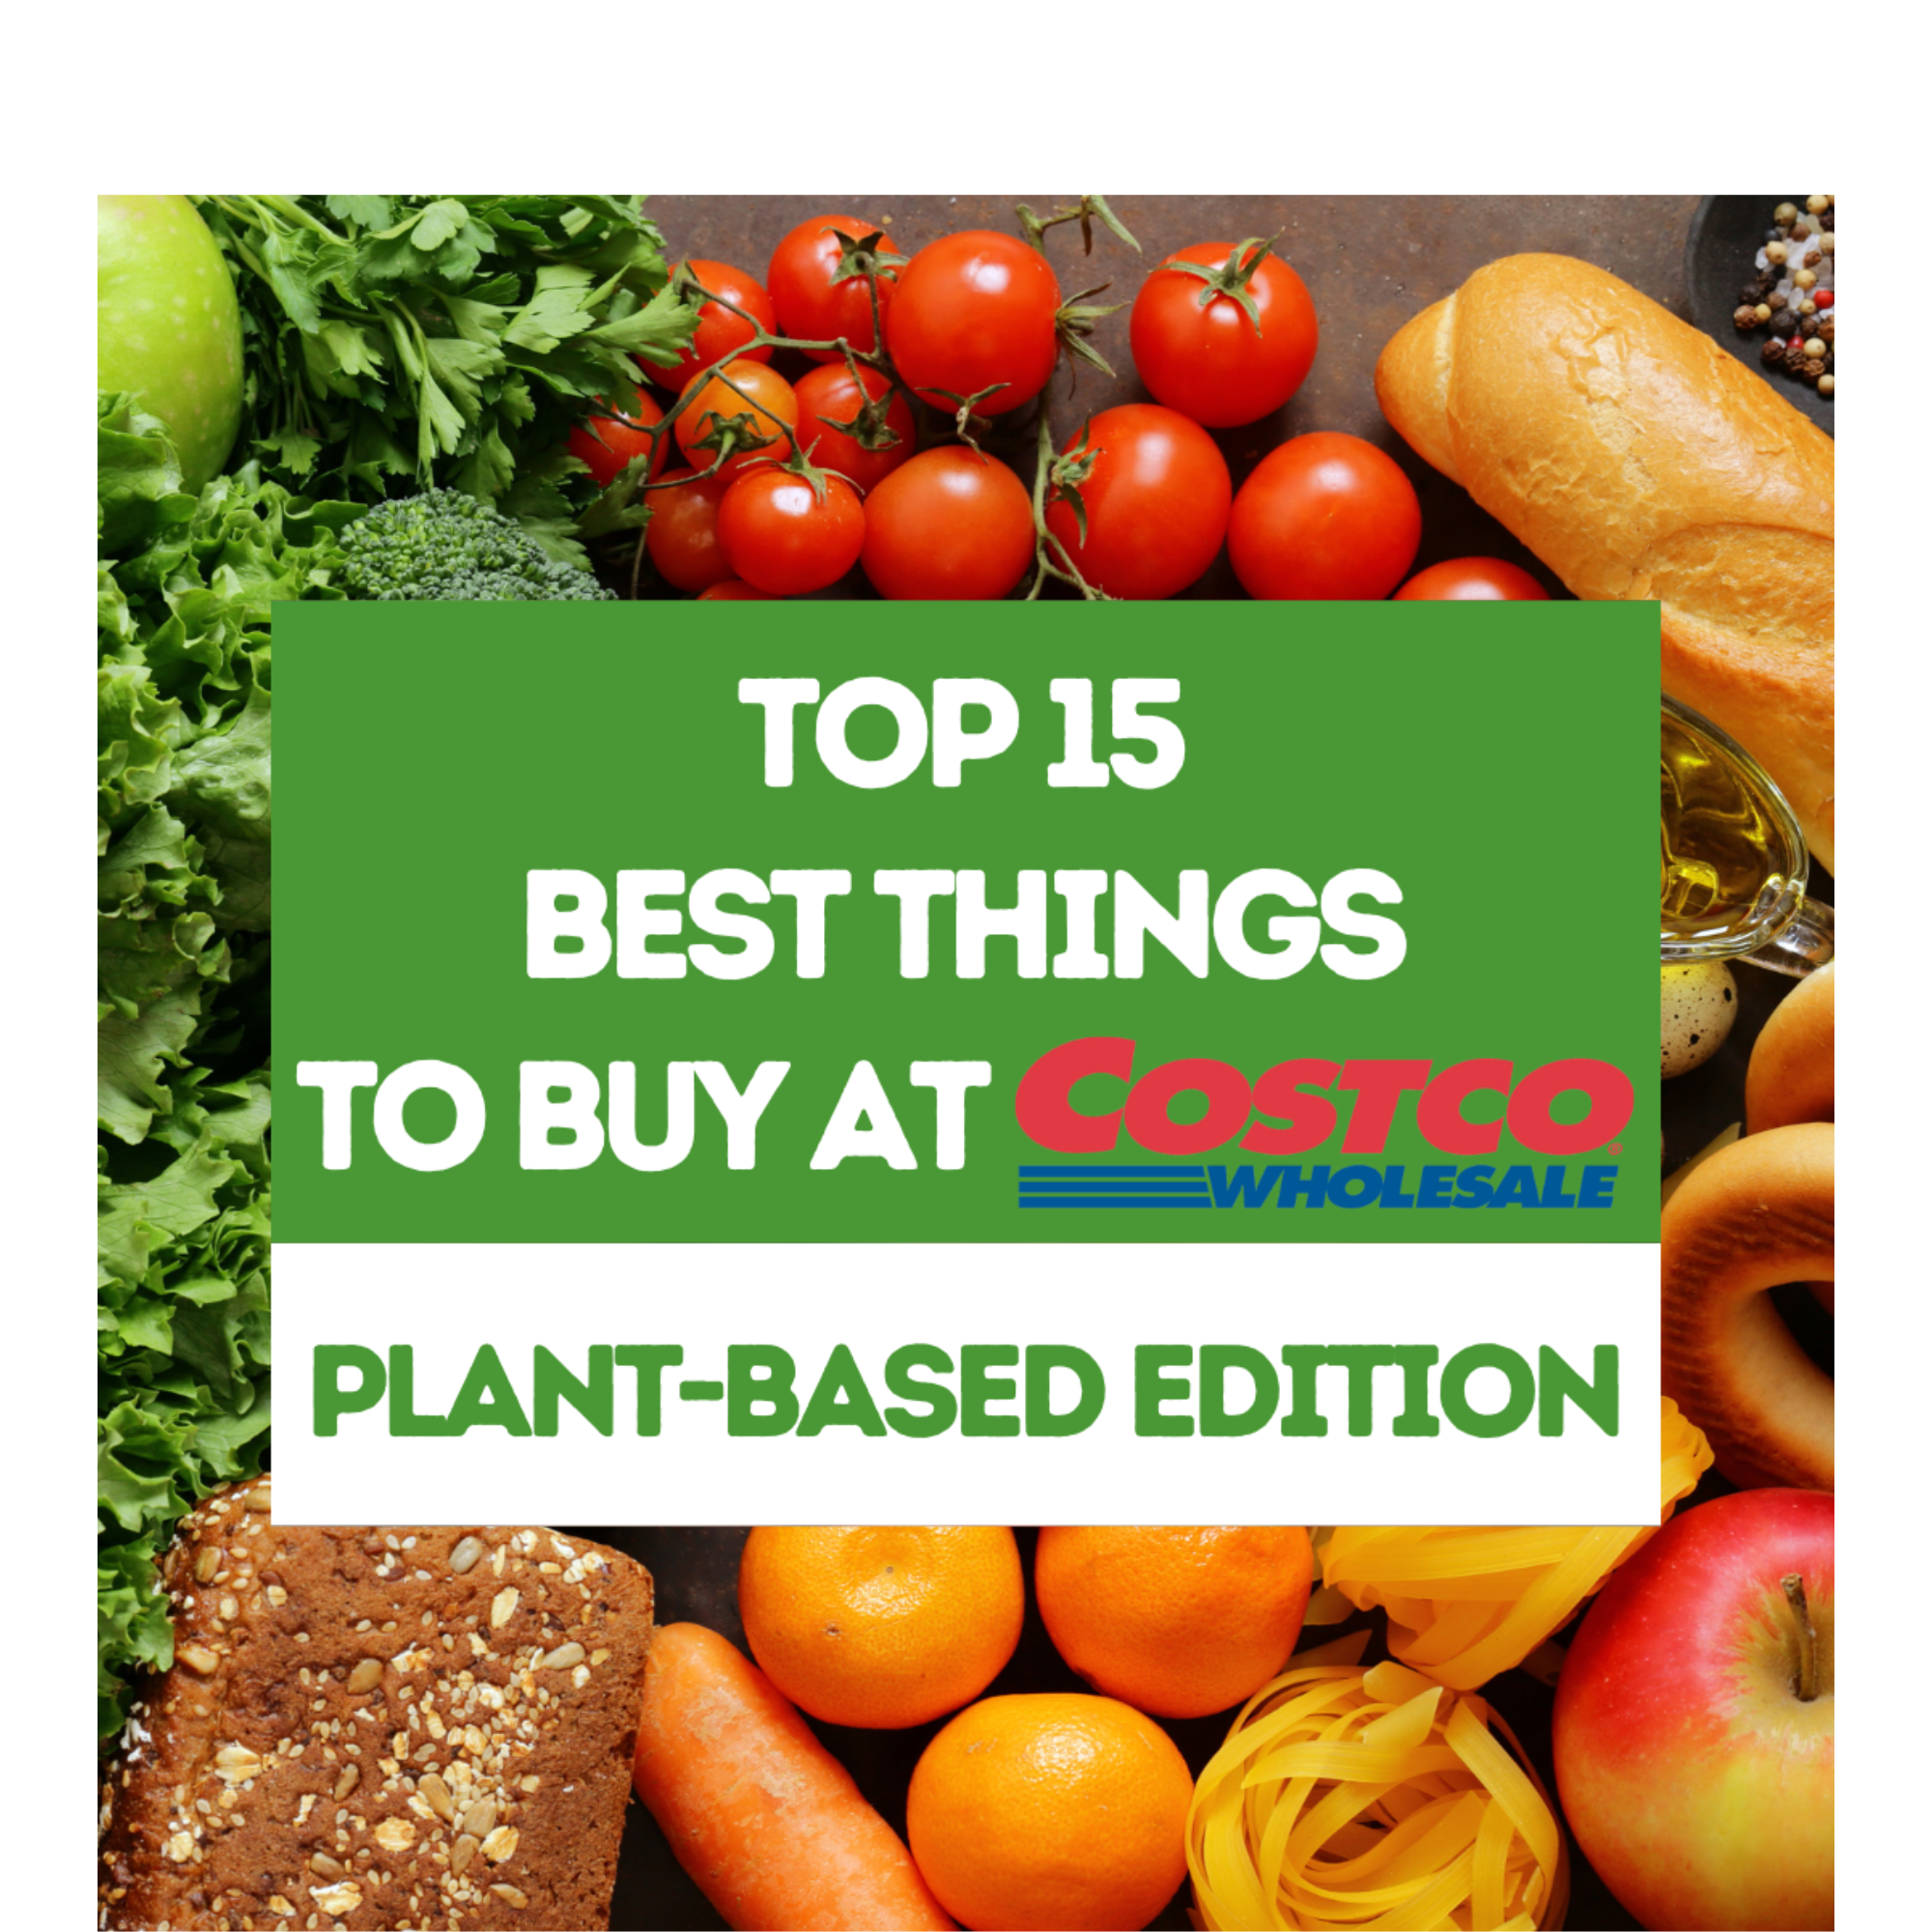 Top 15 Best Things to Buy at Costco: Plant-Based Edition - Sharon Palmer,  The Plant Powered Dietitian